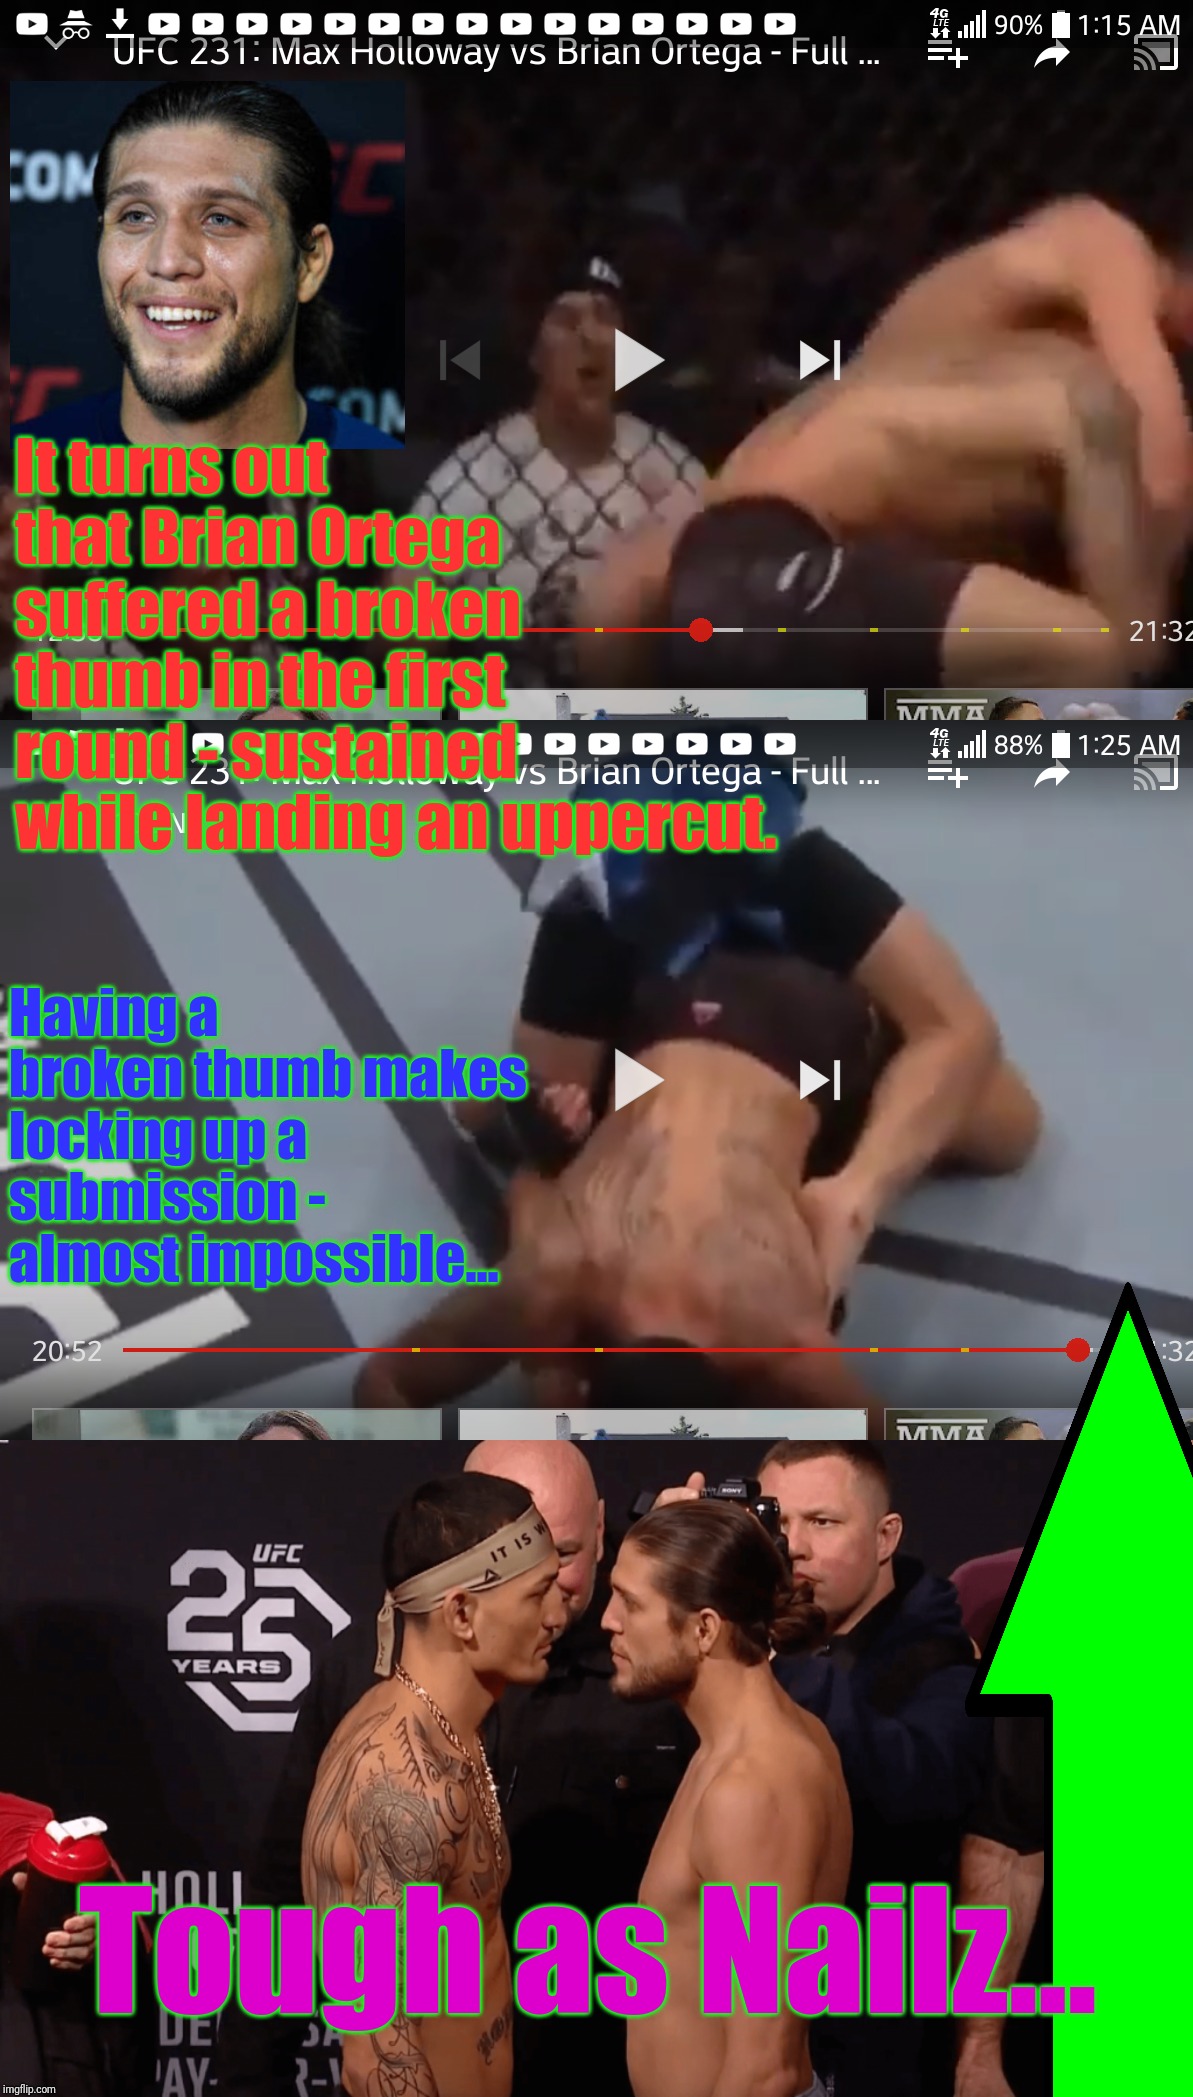 It turns out that Brian Ortega suffered a broken thumb in the first round - sustained while landing an uppercut. Tough as Nailz... Having a  | made w/ Imgflip meme maker